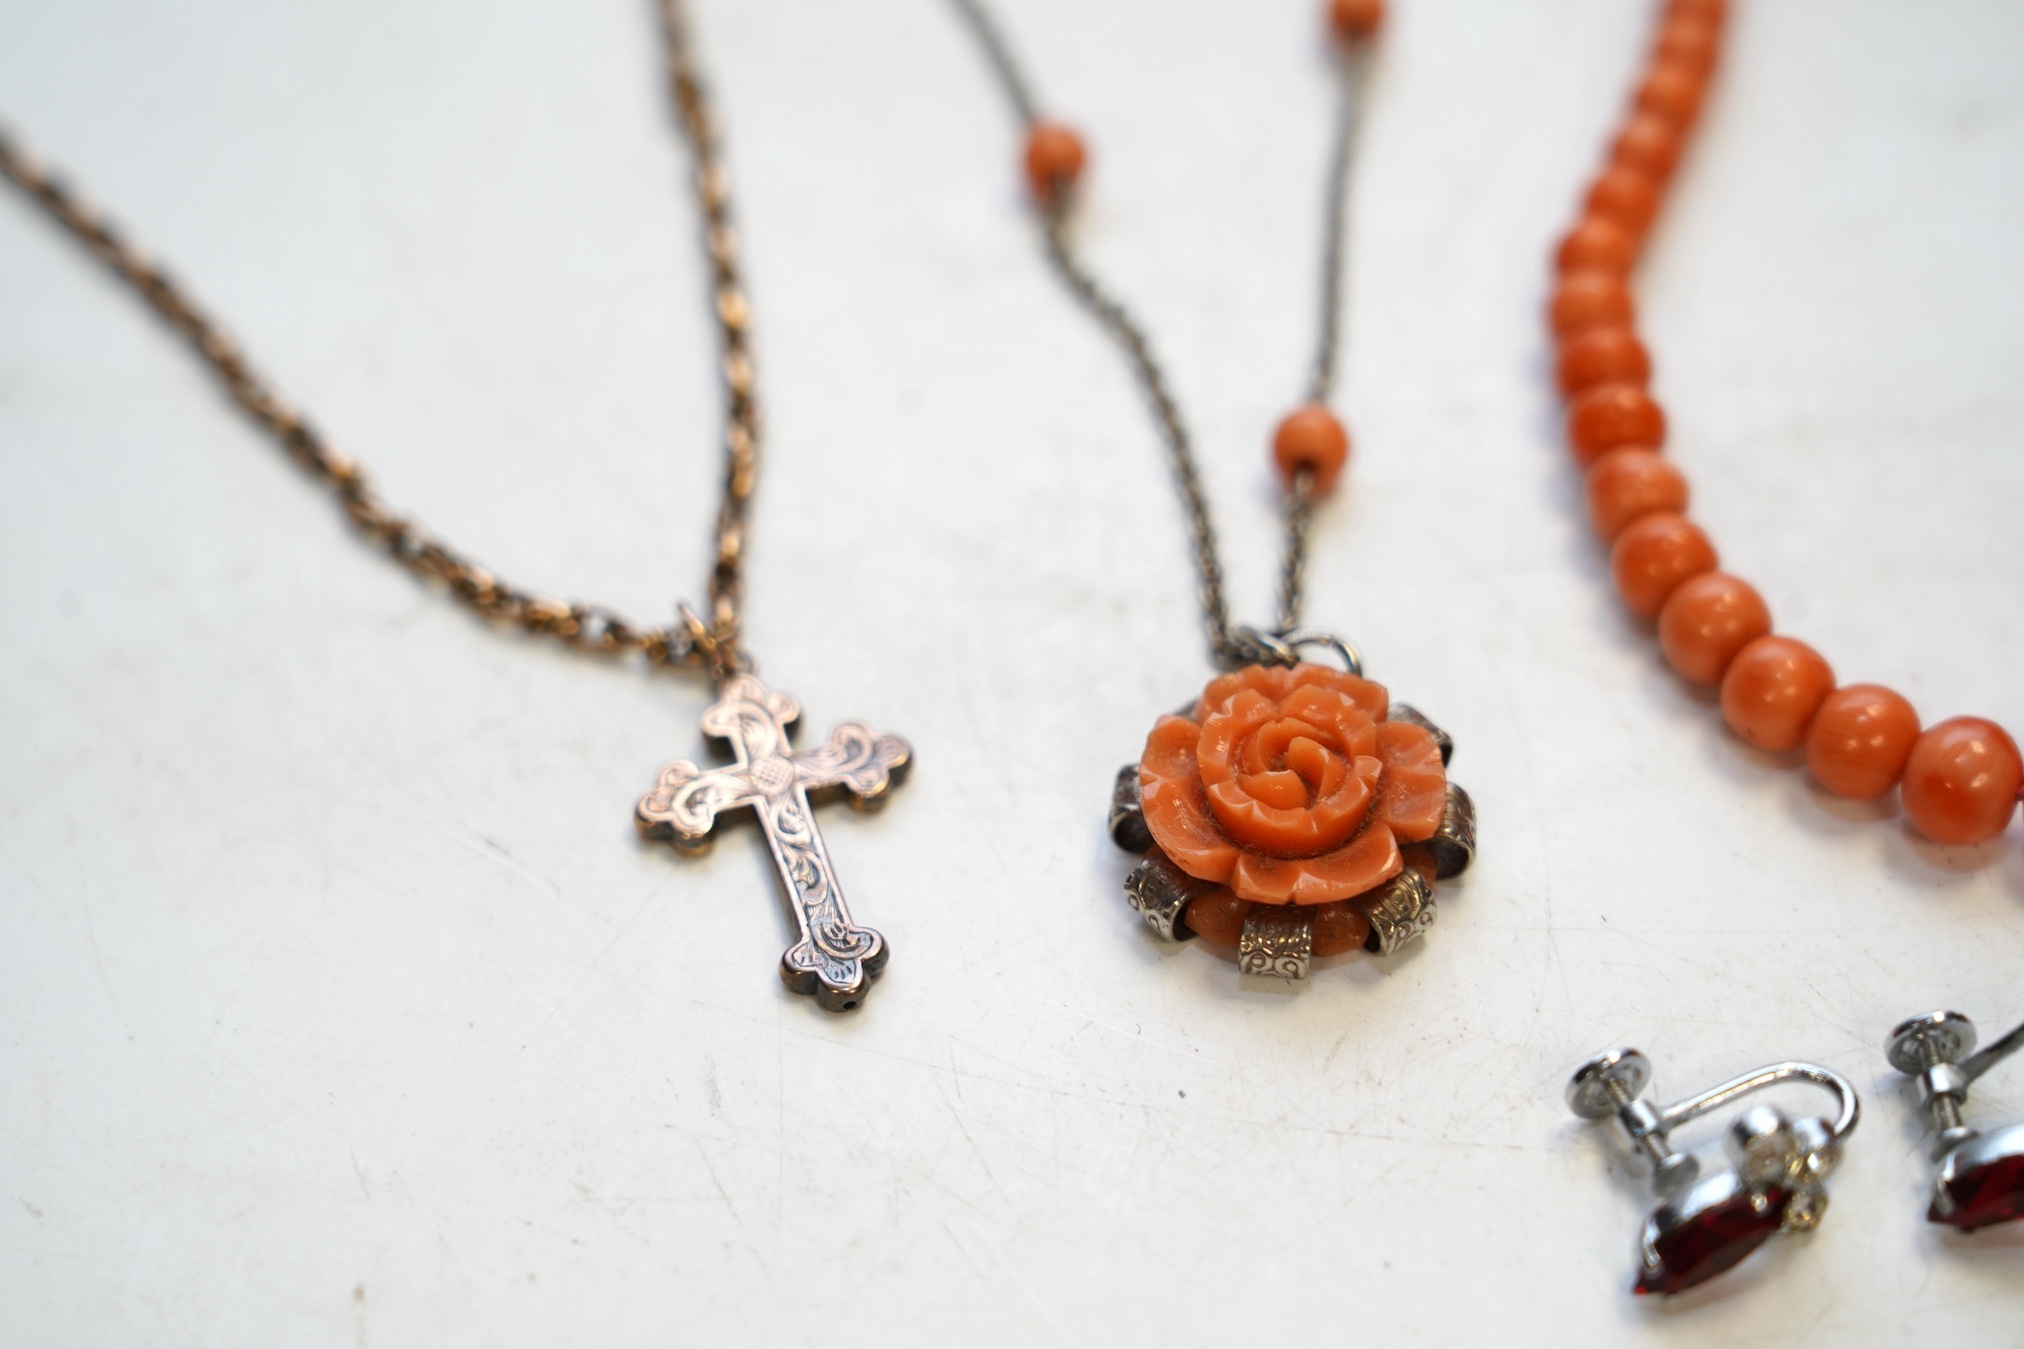 A Victorian yellow metal crucifix on a yellow metal chain, a coral necklace and other assorted jewellery. Condition - fair to poor